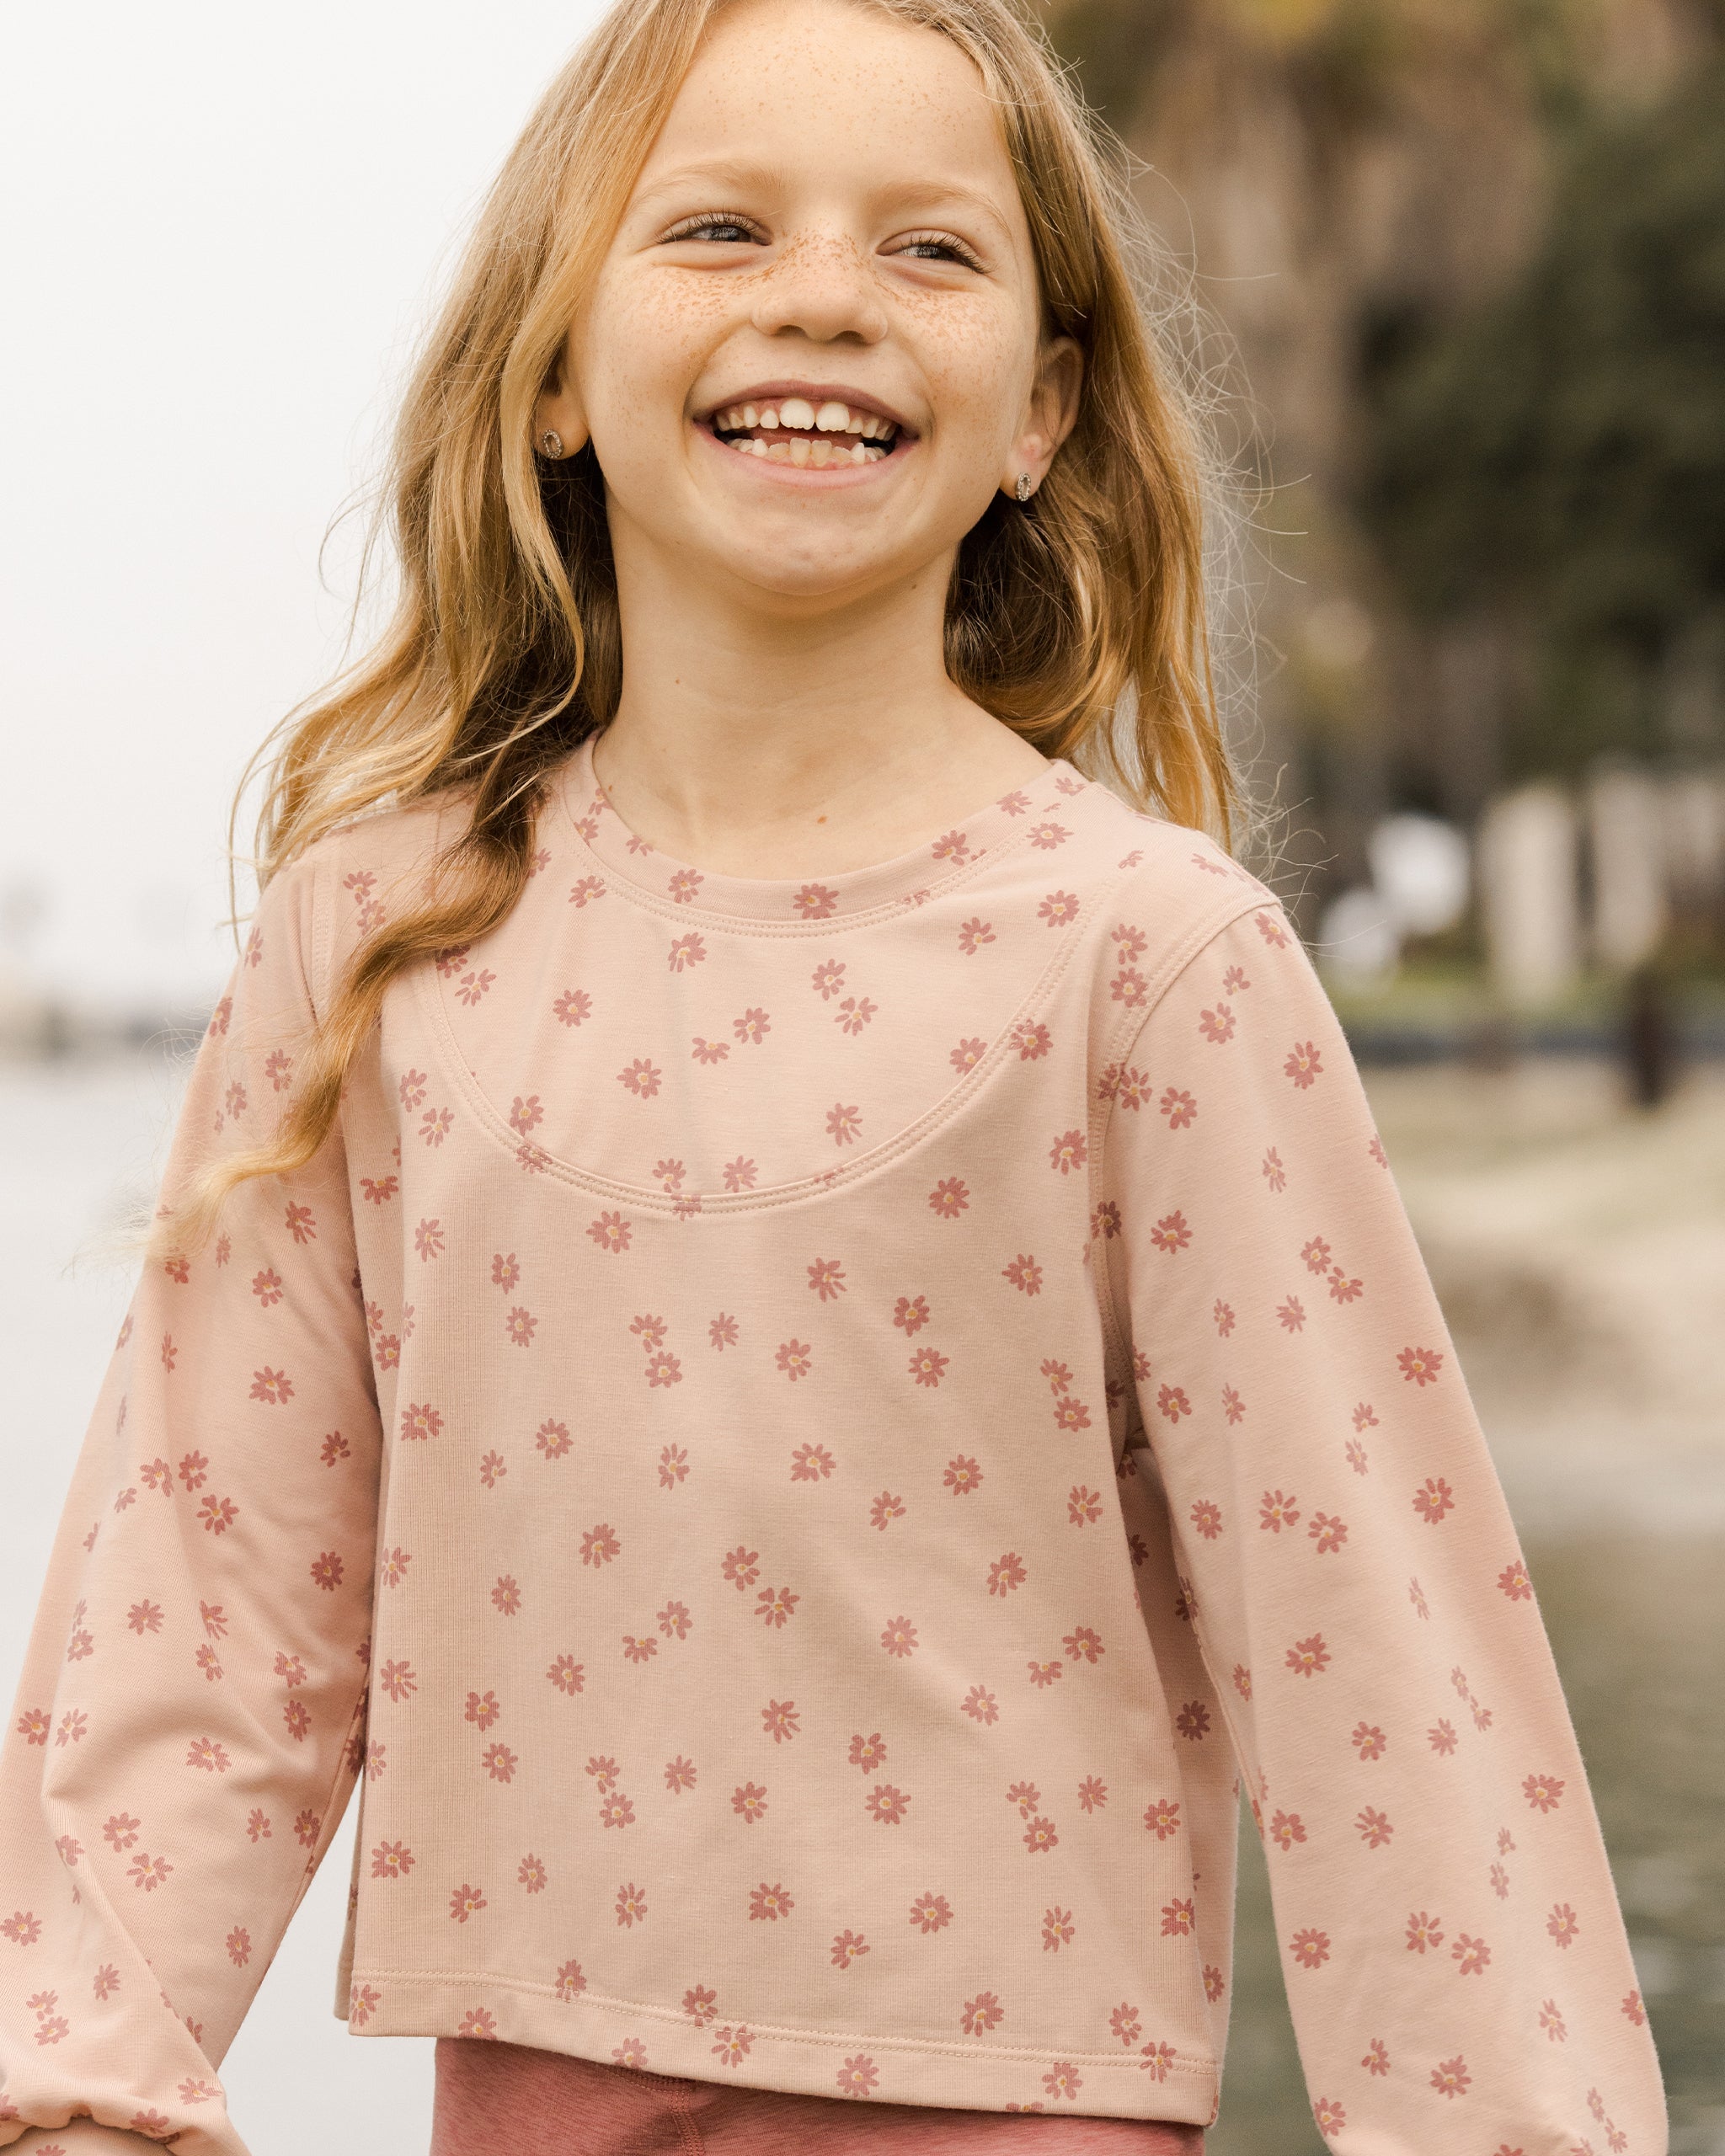 Scoop Long Sleeve || Pink Daisy - Rylee + Cru | Kids Clothes | Trendy Baby Clothes | Modern Infant Outfits |